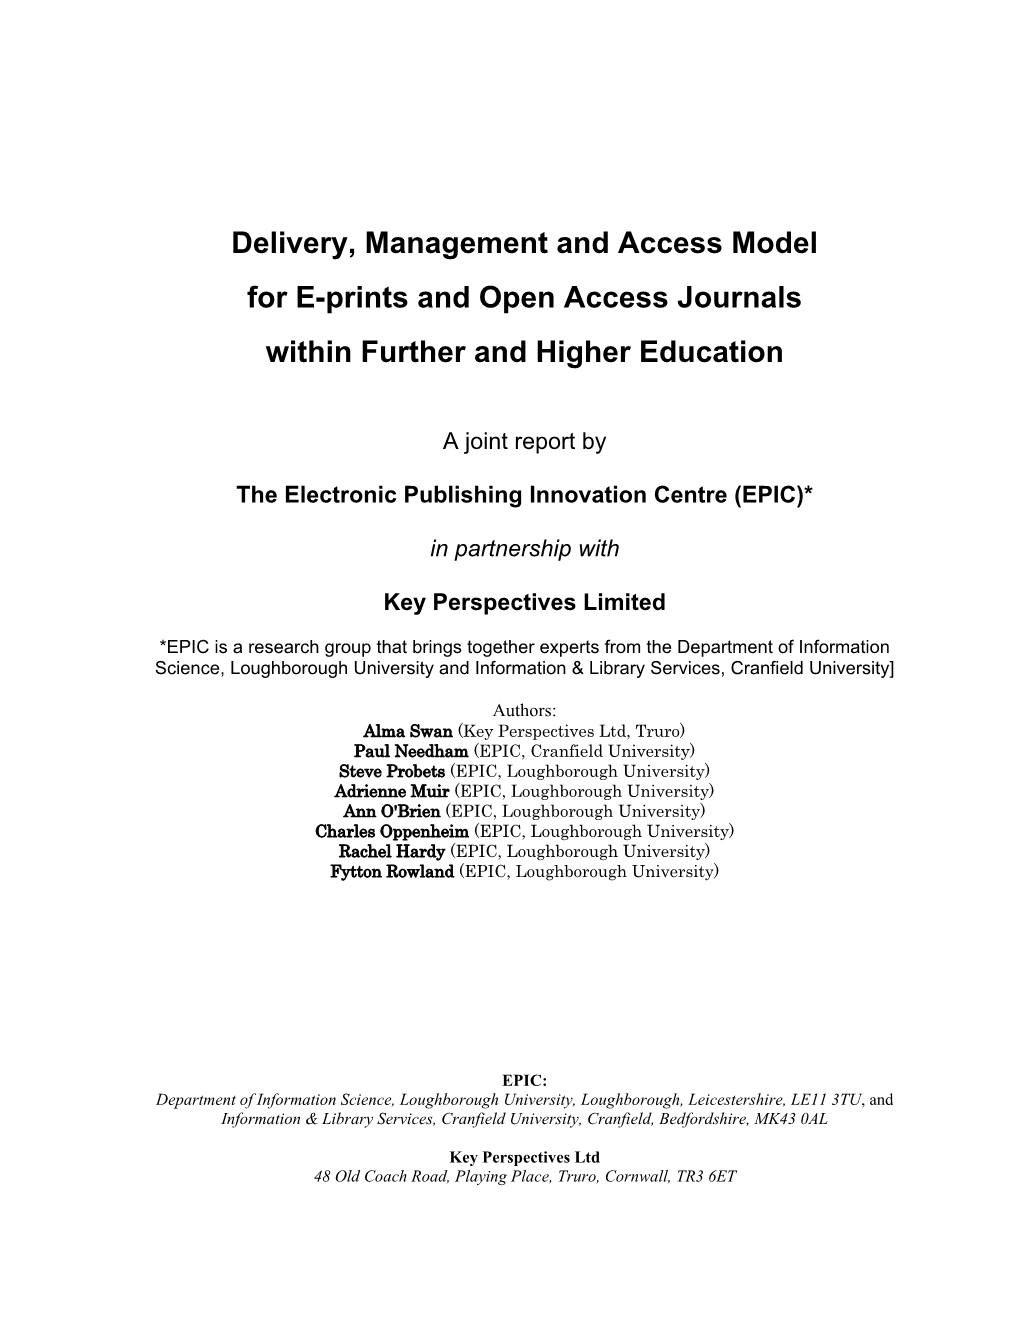 Delivery, Management and Access Model for E-Prints and Open Access Journals Within Further and Higher Education